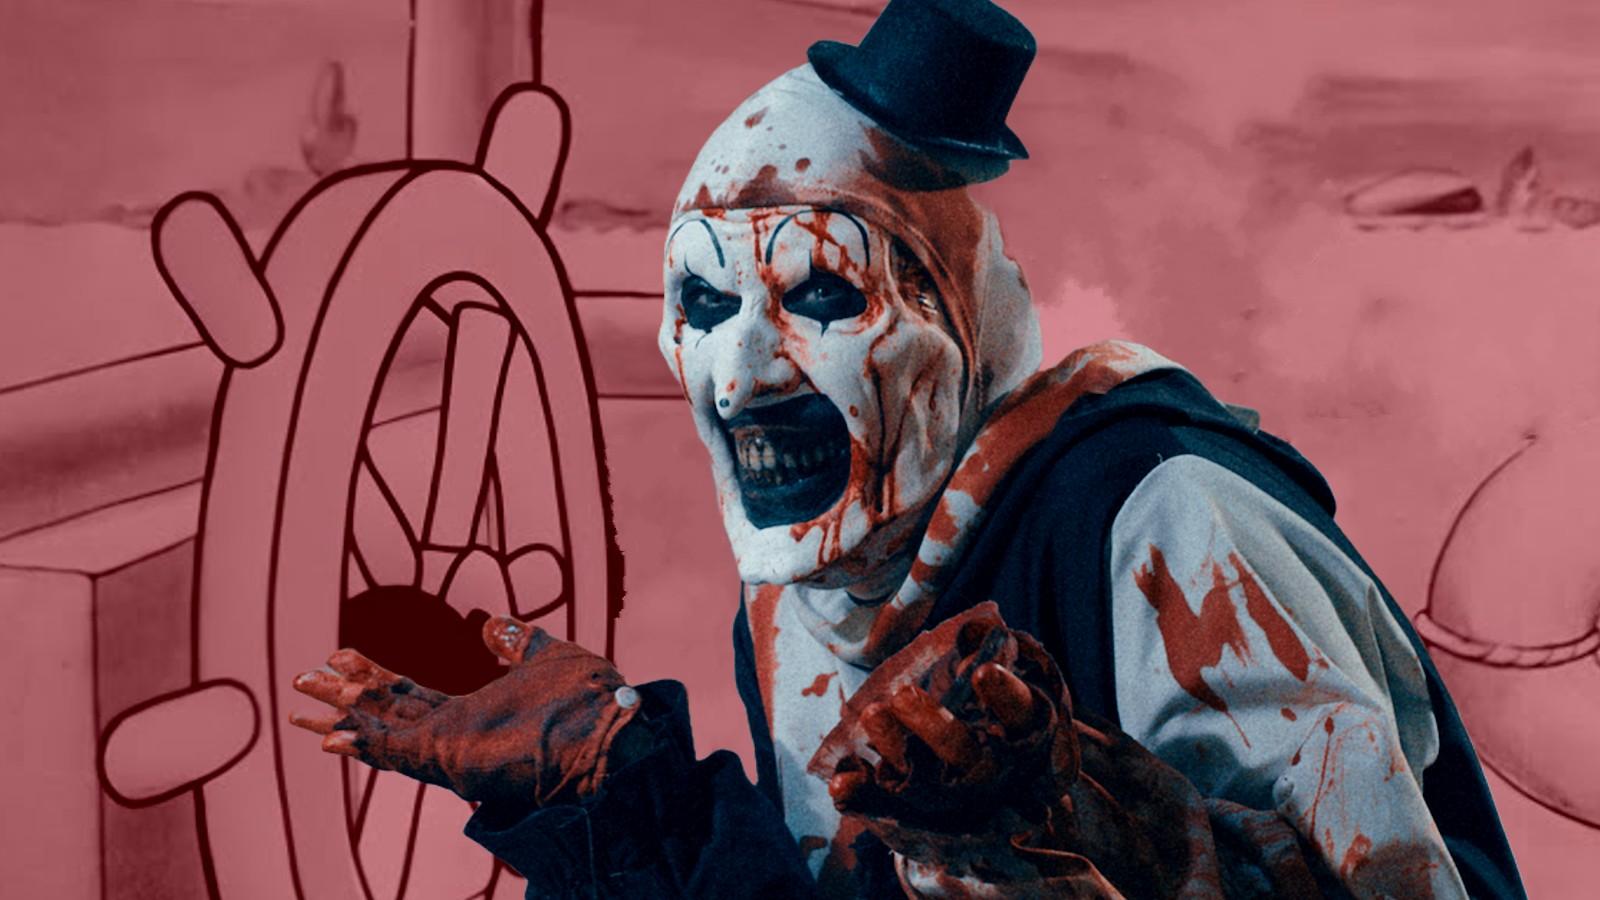 Art the Clown from Terrifier and the backdrop of Steamboat Willie